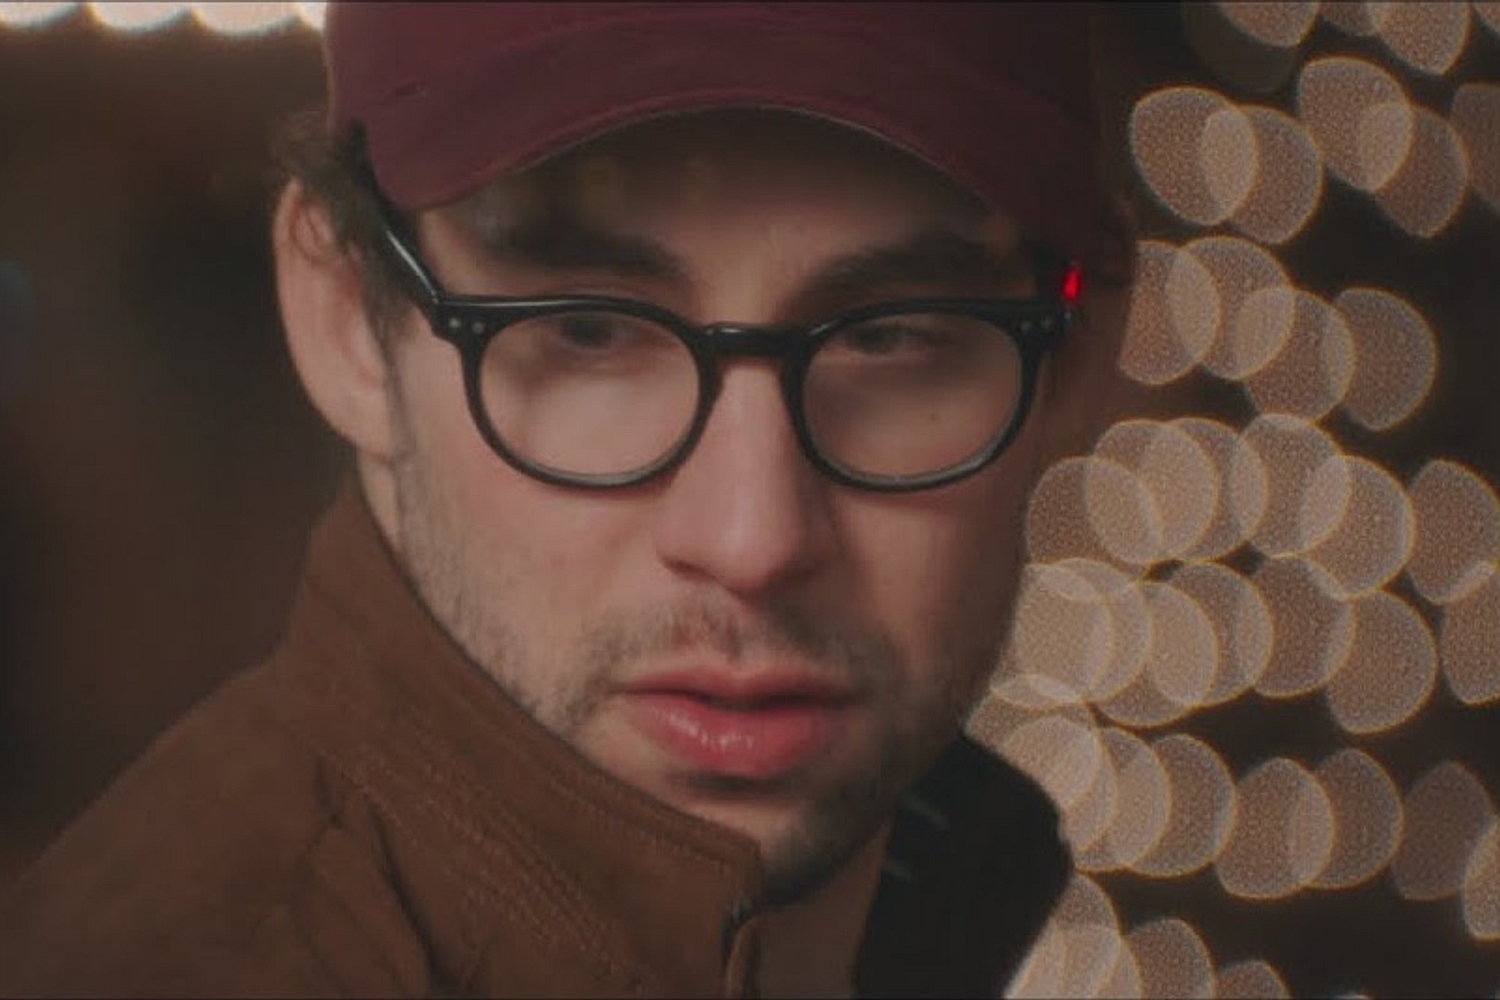 Bleachers stars in his own rom-com in the video for ‘Alfie’s Song (Not So Typical Love Song)’